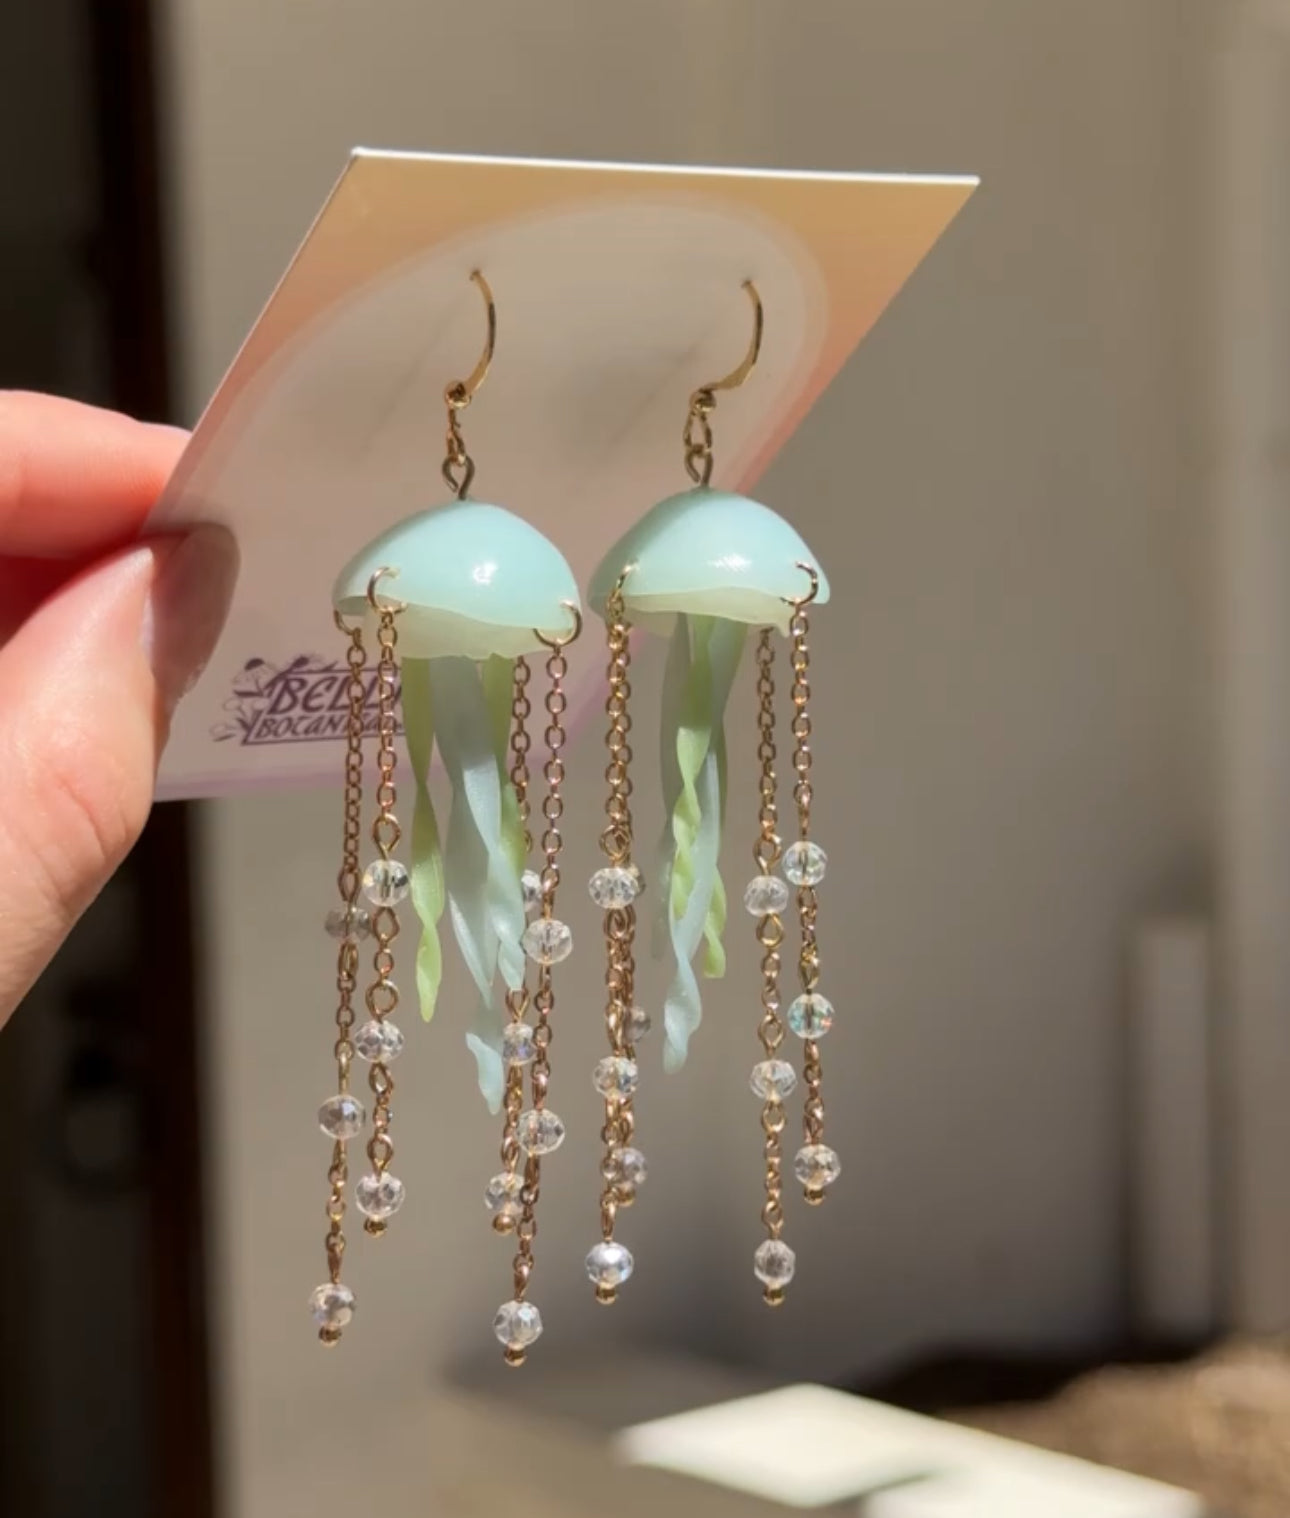 Translucent Jellyfish - Polymer Clay Dangle Earrings